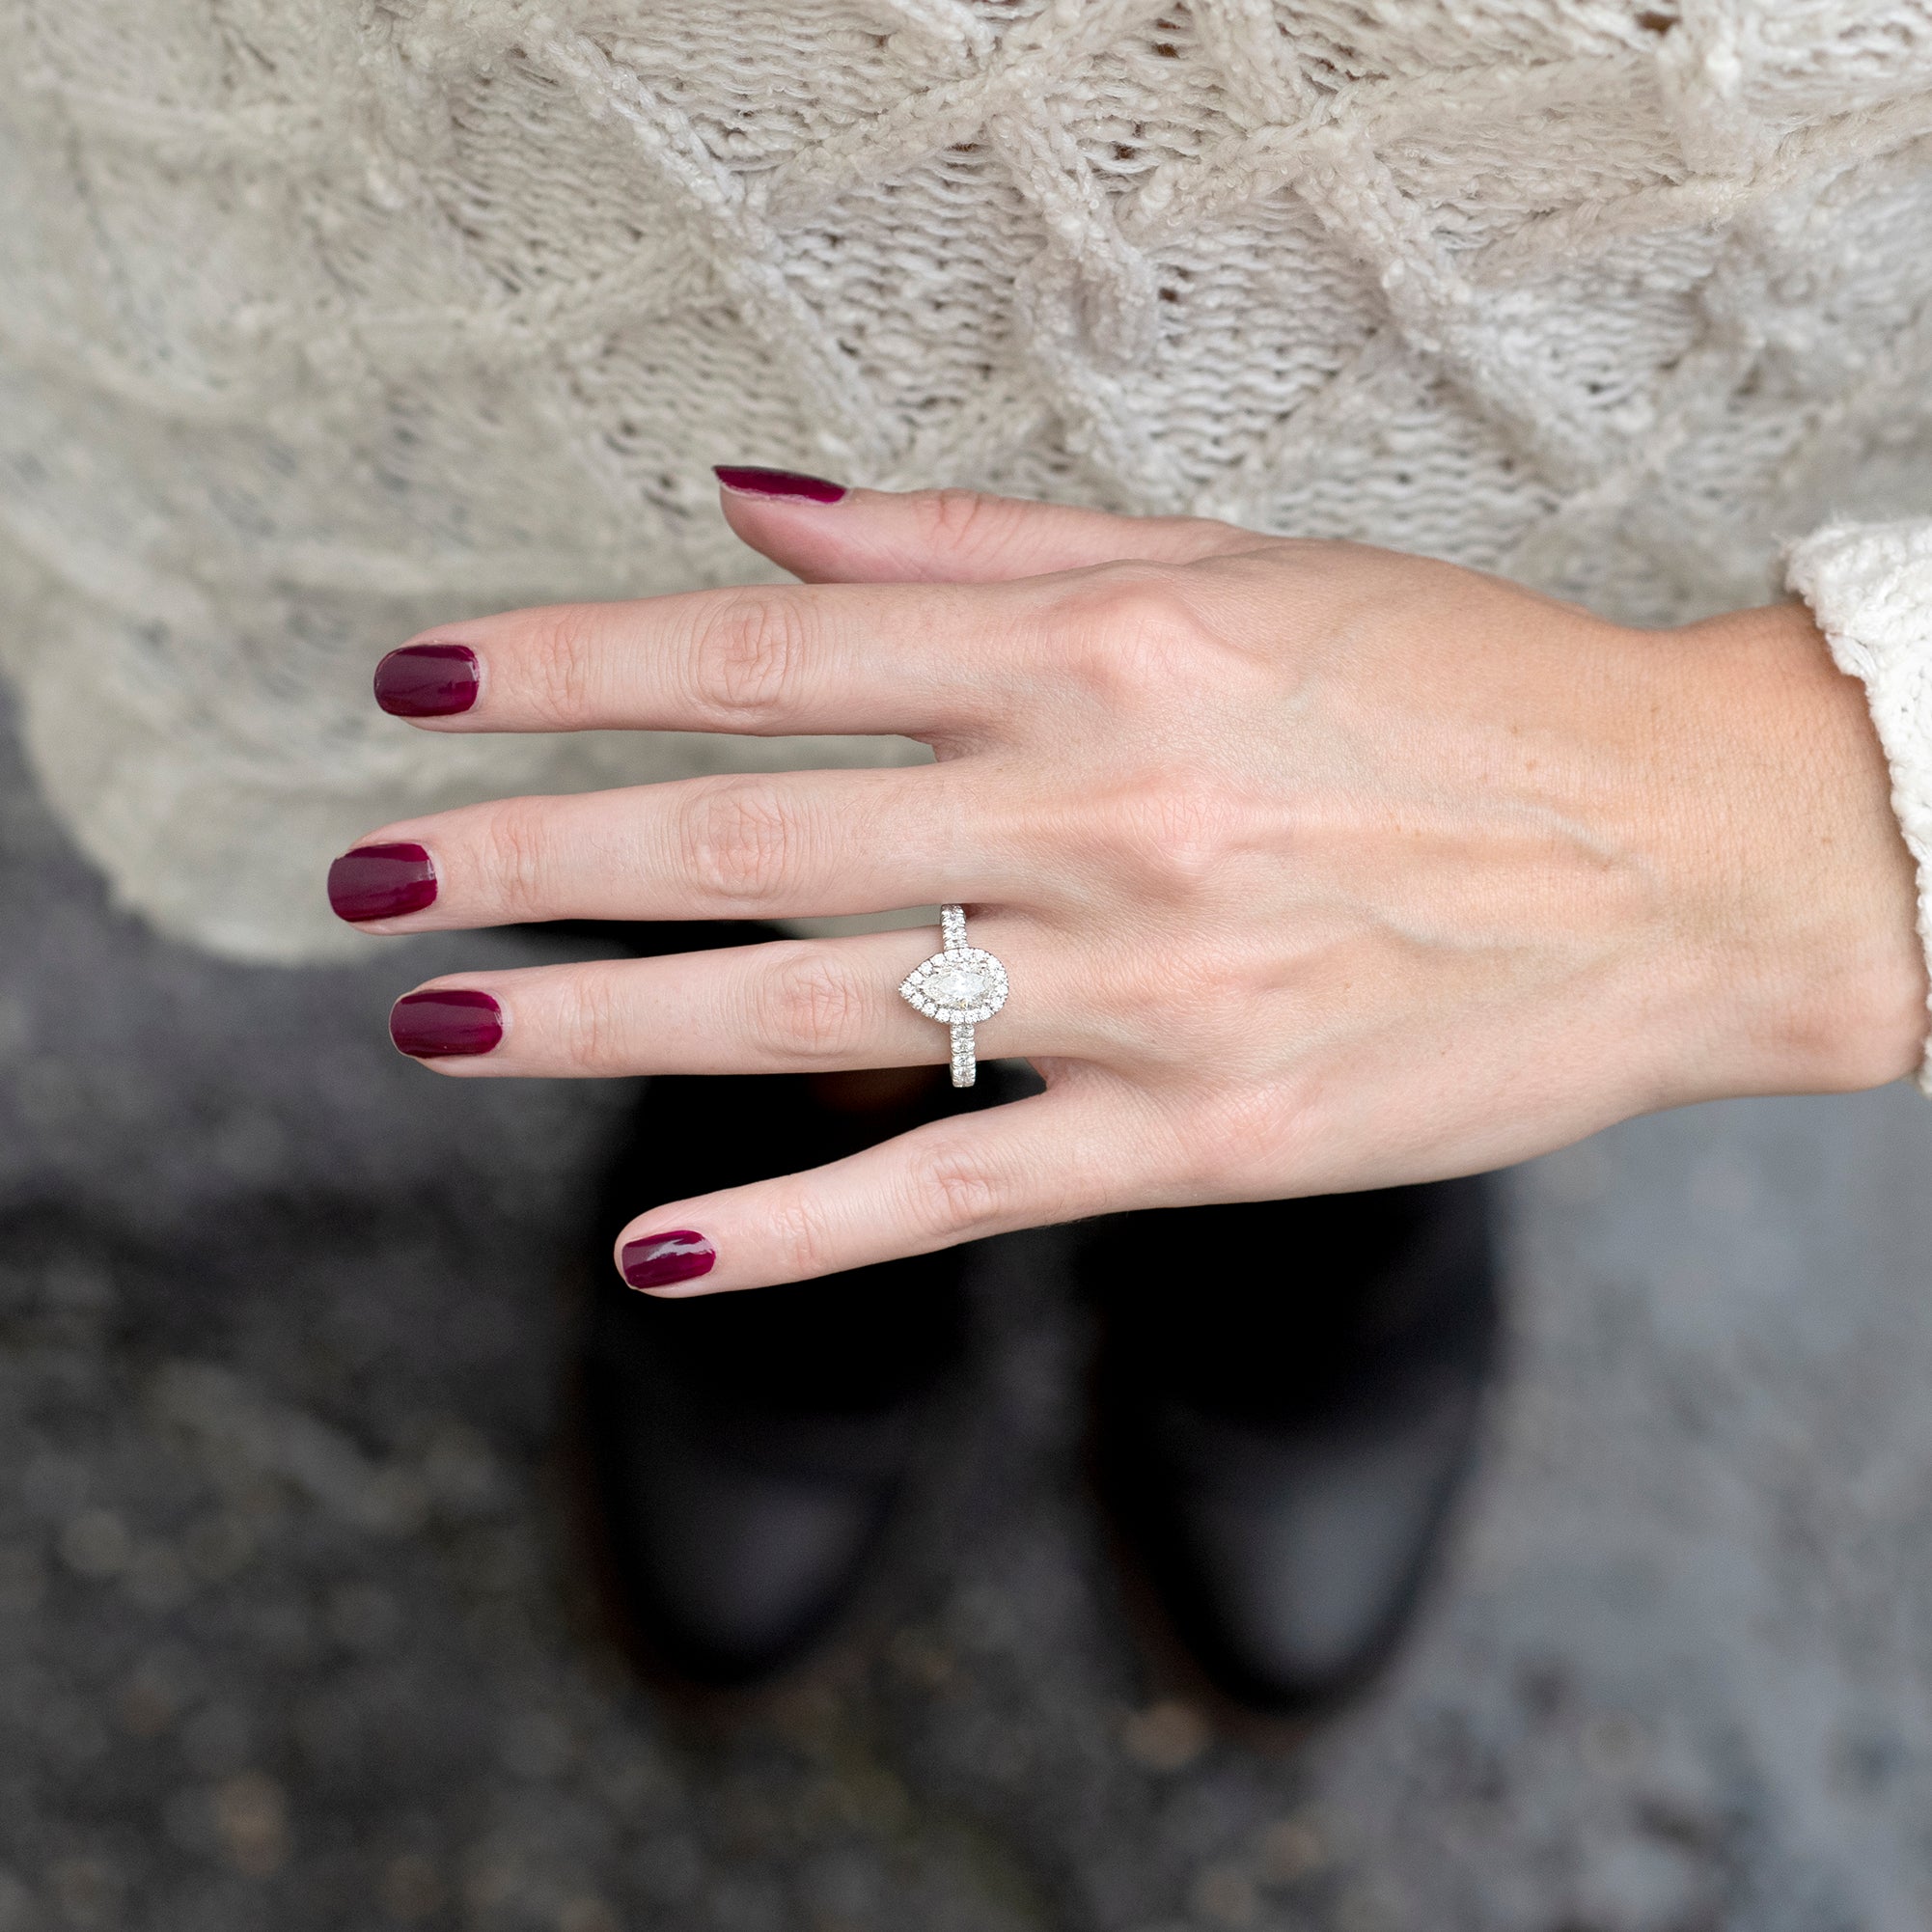 6 Ways To Find Her Ring Size Without Her Knowing